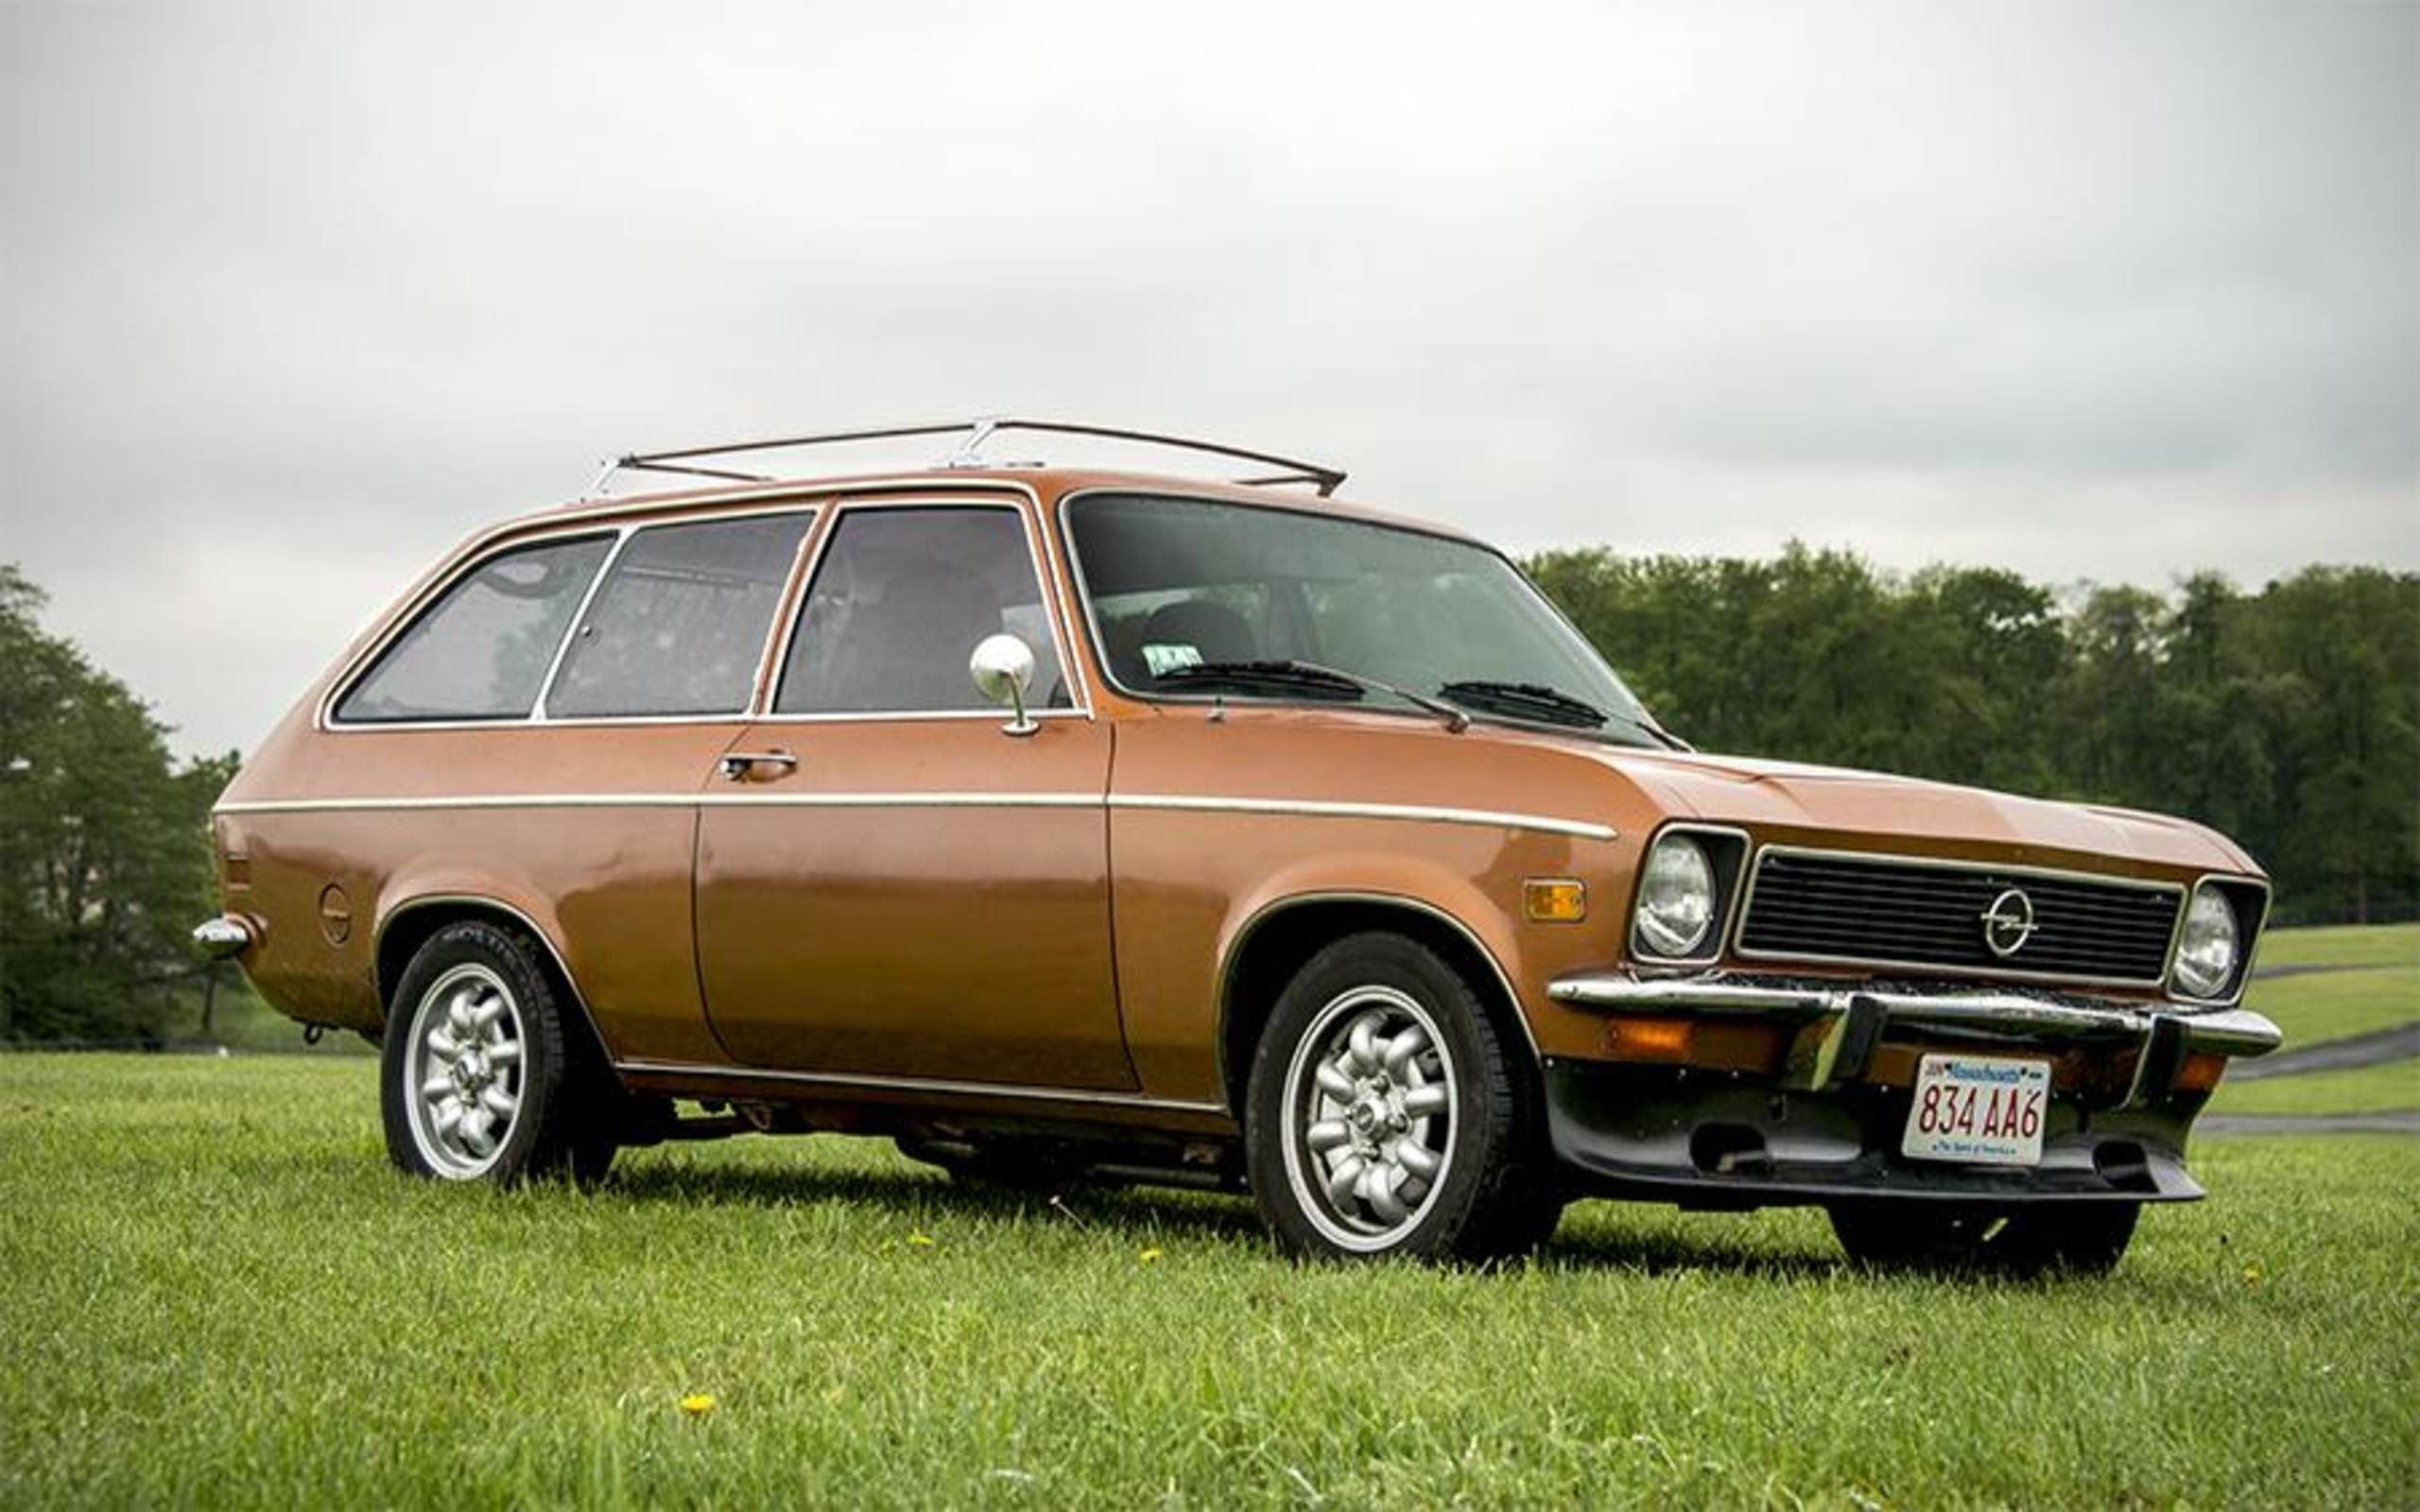 gallon Statistisch taxi The Opel 1900 Sport Wagon is not your average grocery getter